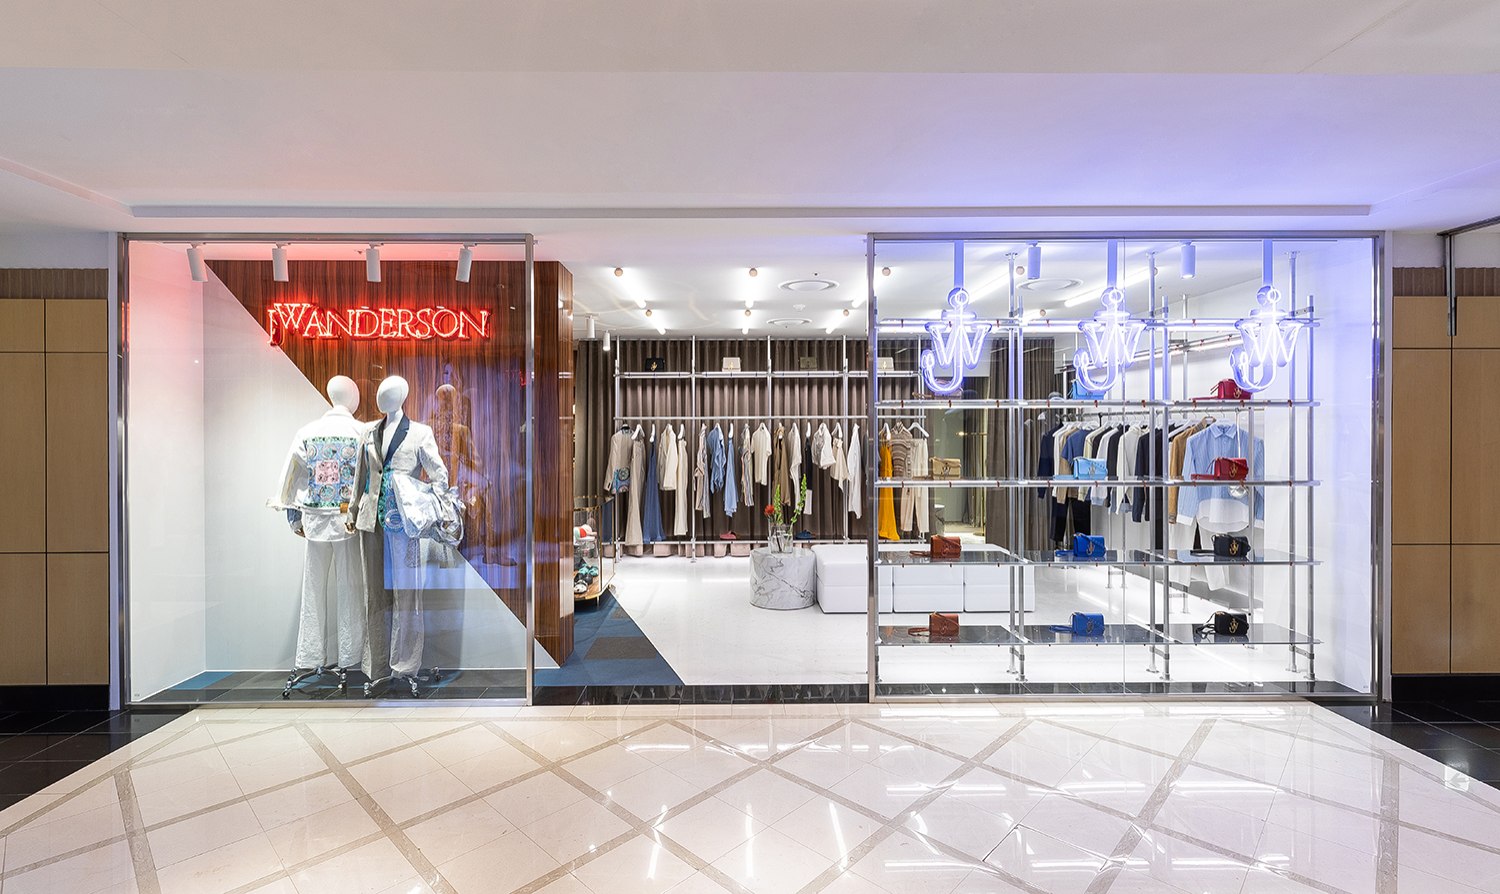 Seoul: JW Anderson store opening | superfuture®